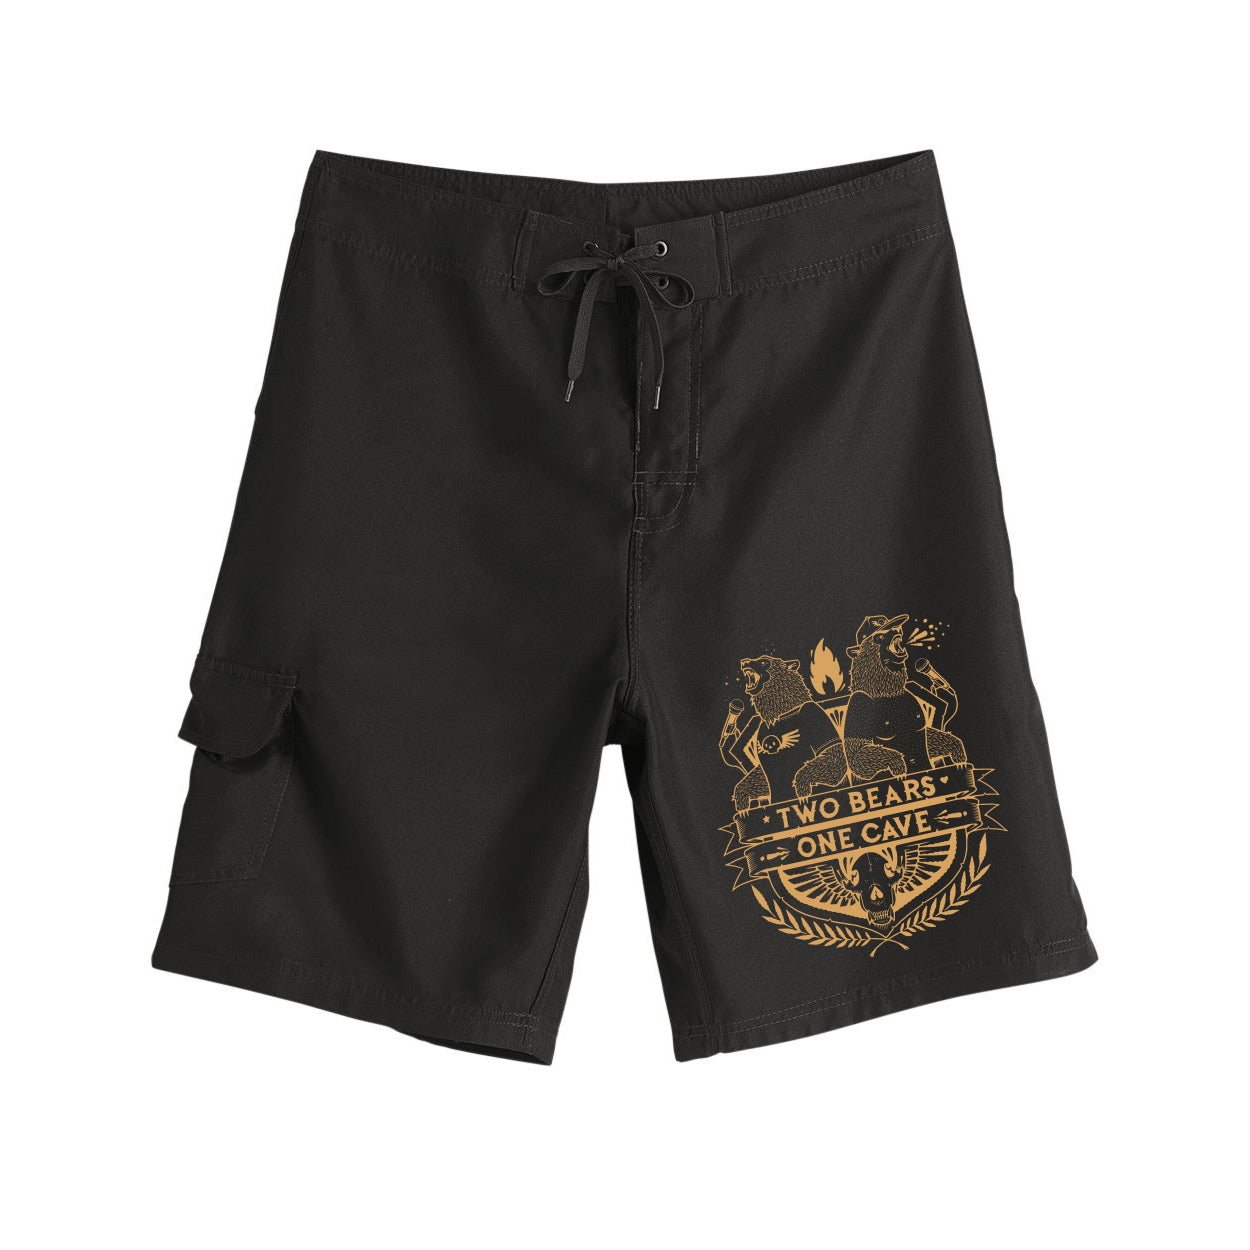 2 BEARS, 1 CAVE by Jeremy Fish Board Shorts – YMH Studios Online Store